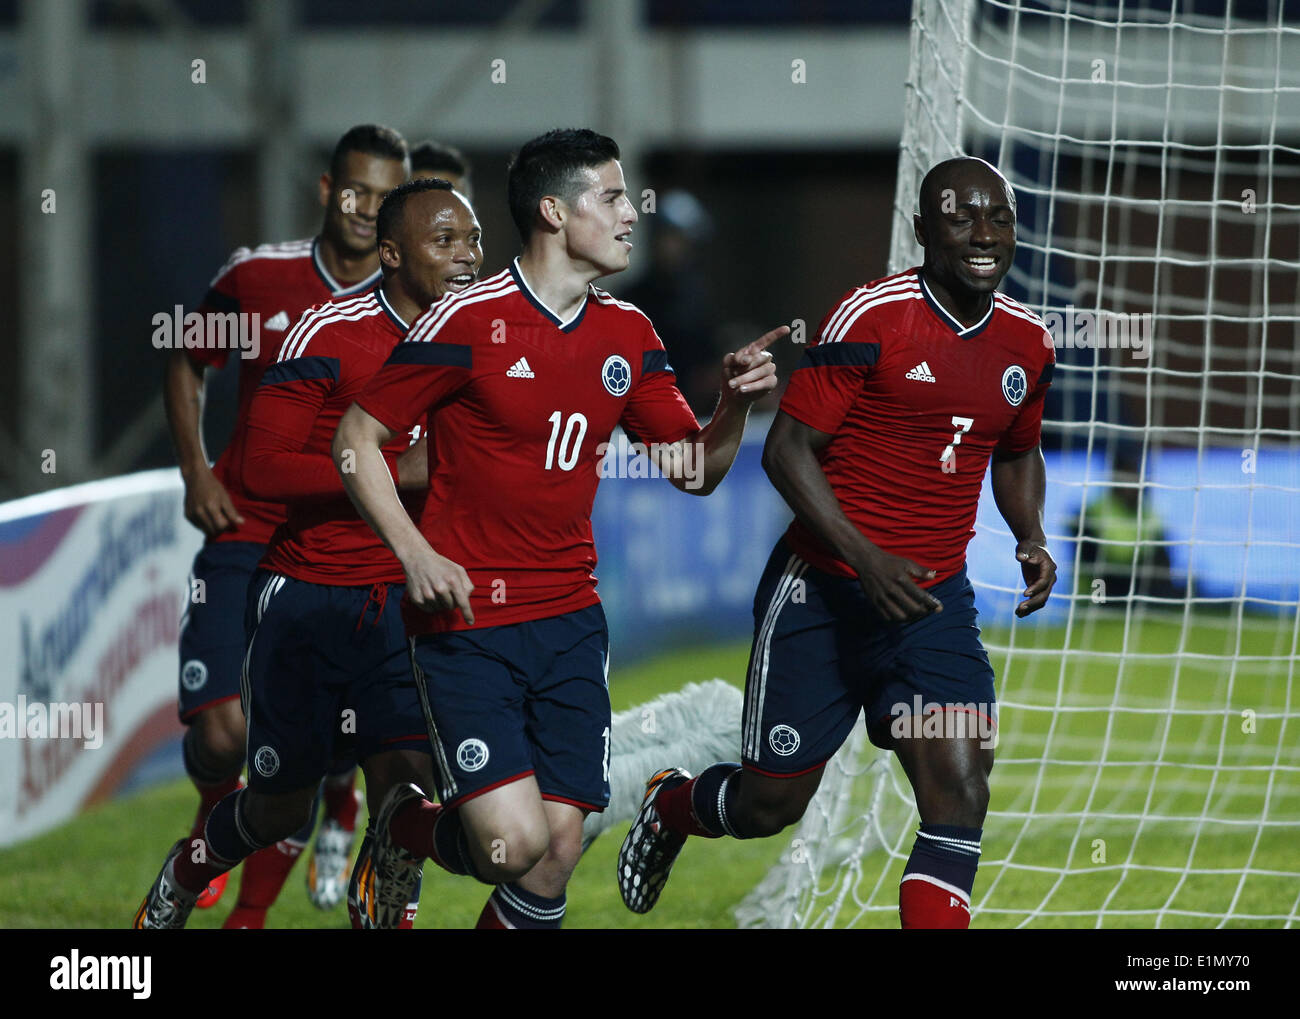 Buenos Aires, Argentina. 6th June, 2014. Colombia's James Rodriguez (2nd R) and Pablo Armero (1st R) celebrate after scoring against Jordan during the friendly match held at Pedro Bidegain Stadium in Buenos Aires City, capital of Argentina, on June 6, 2014. Colombia's national soccer team faced Jordan before their participation in the FIFA Wolrd Cup. Credit:  Santiago Pandolfi/Xinhua/Alamy Live News Stock Photo